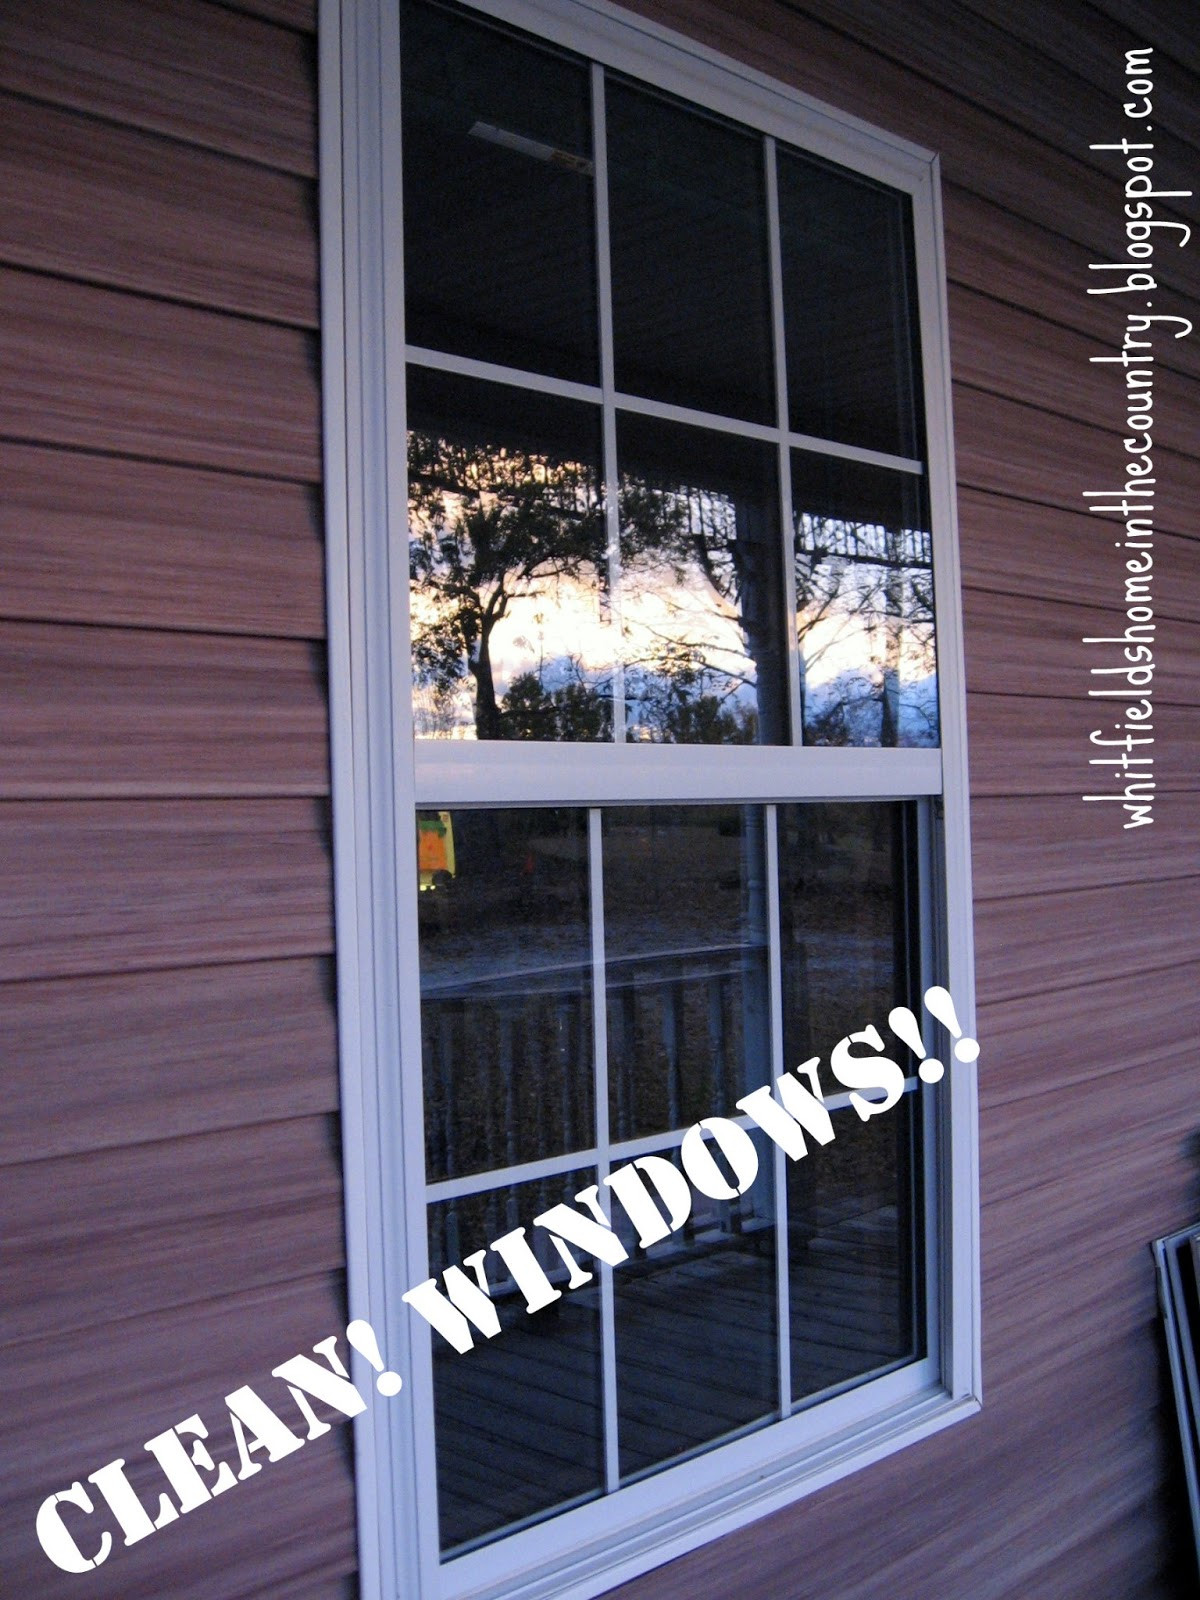 DIY Outdoor Window Cleaner
 Whitfield s Home ♥ In The Country Homemade Outdoor